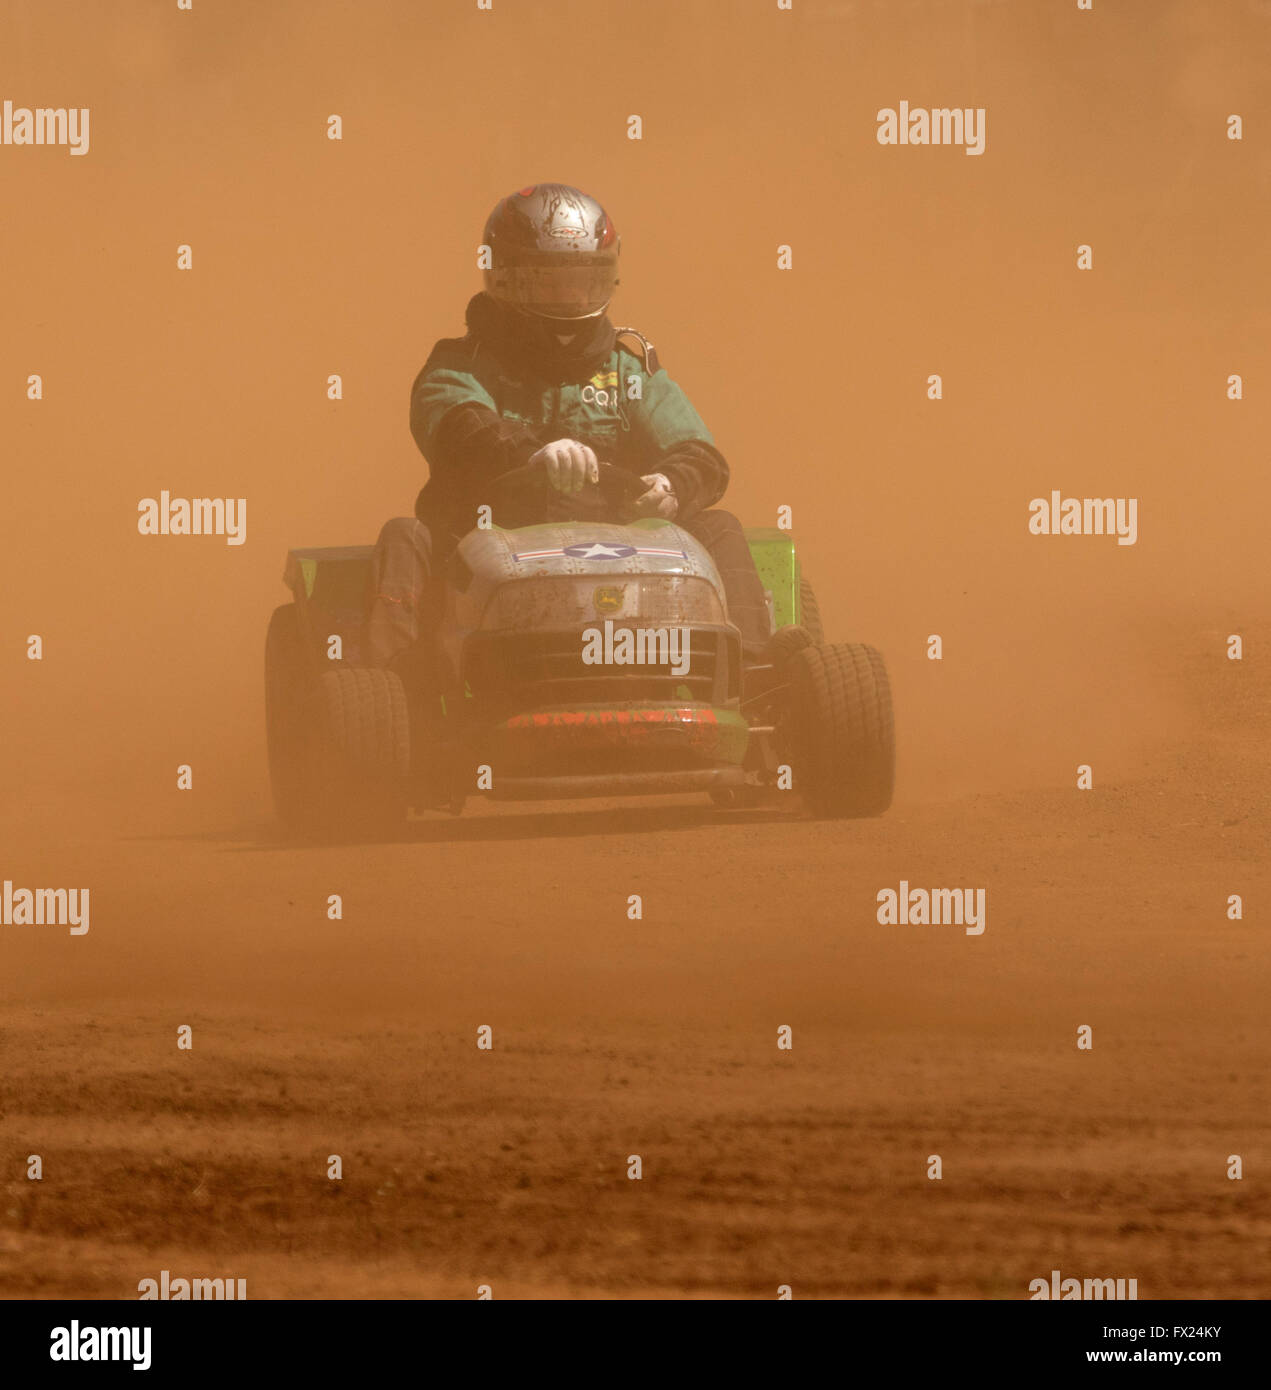 Man with helmet & overalls driving motor mower emerging from cloud of red dust on track in unusual Australian motor racing sport Stock Photo